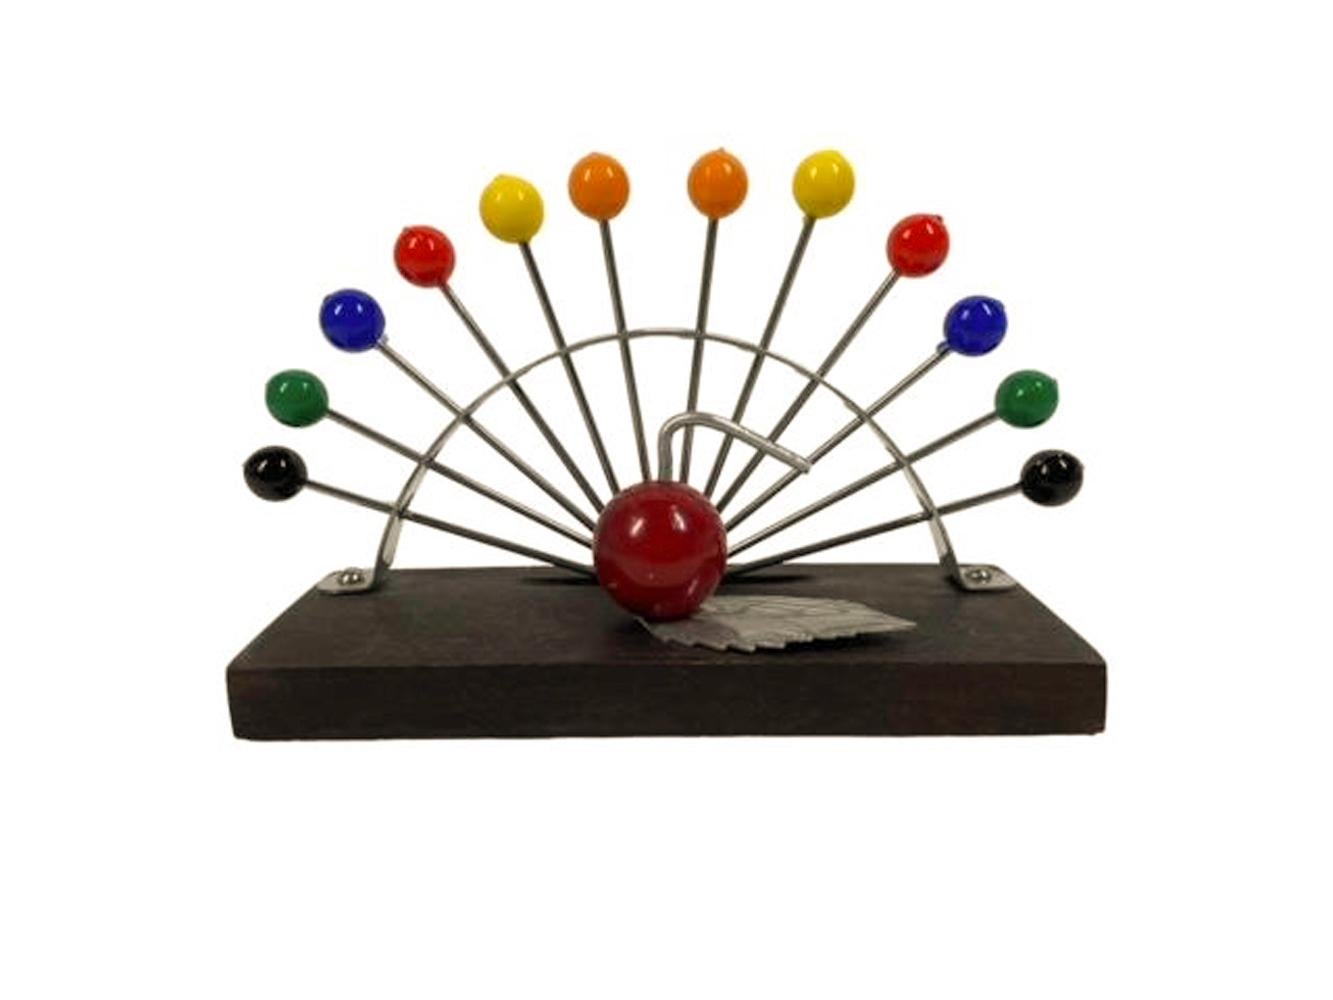 Set of 12 French, Art Deco cocktail picks (2 each of 6 colors), together with a stand having a red Bakelite and chrome apple on a wood base in front of a perforated metal arch which holds the picks in an arc.